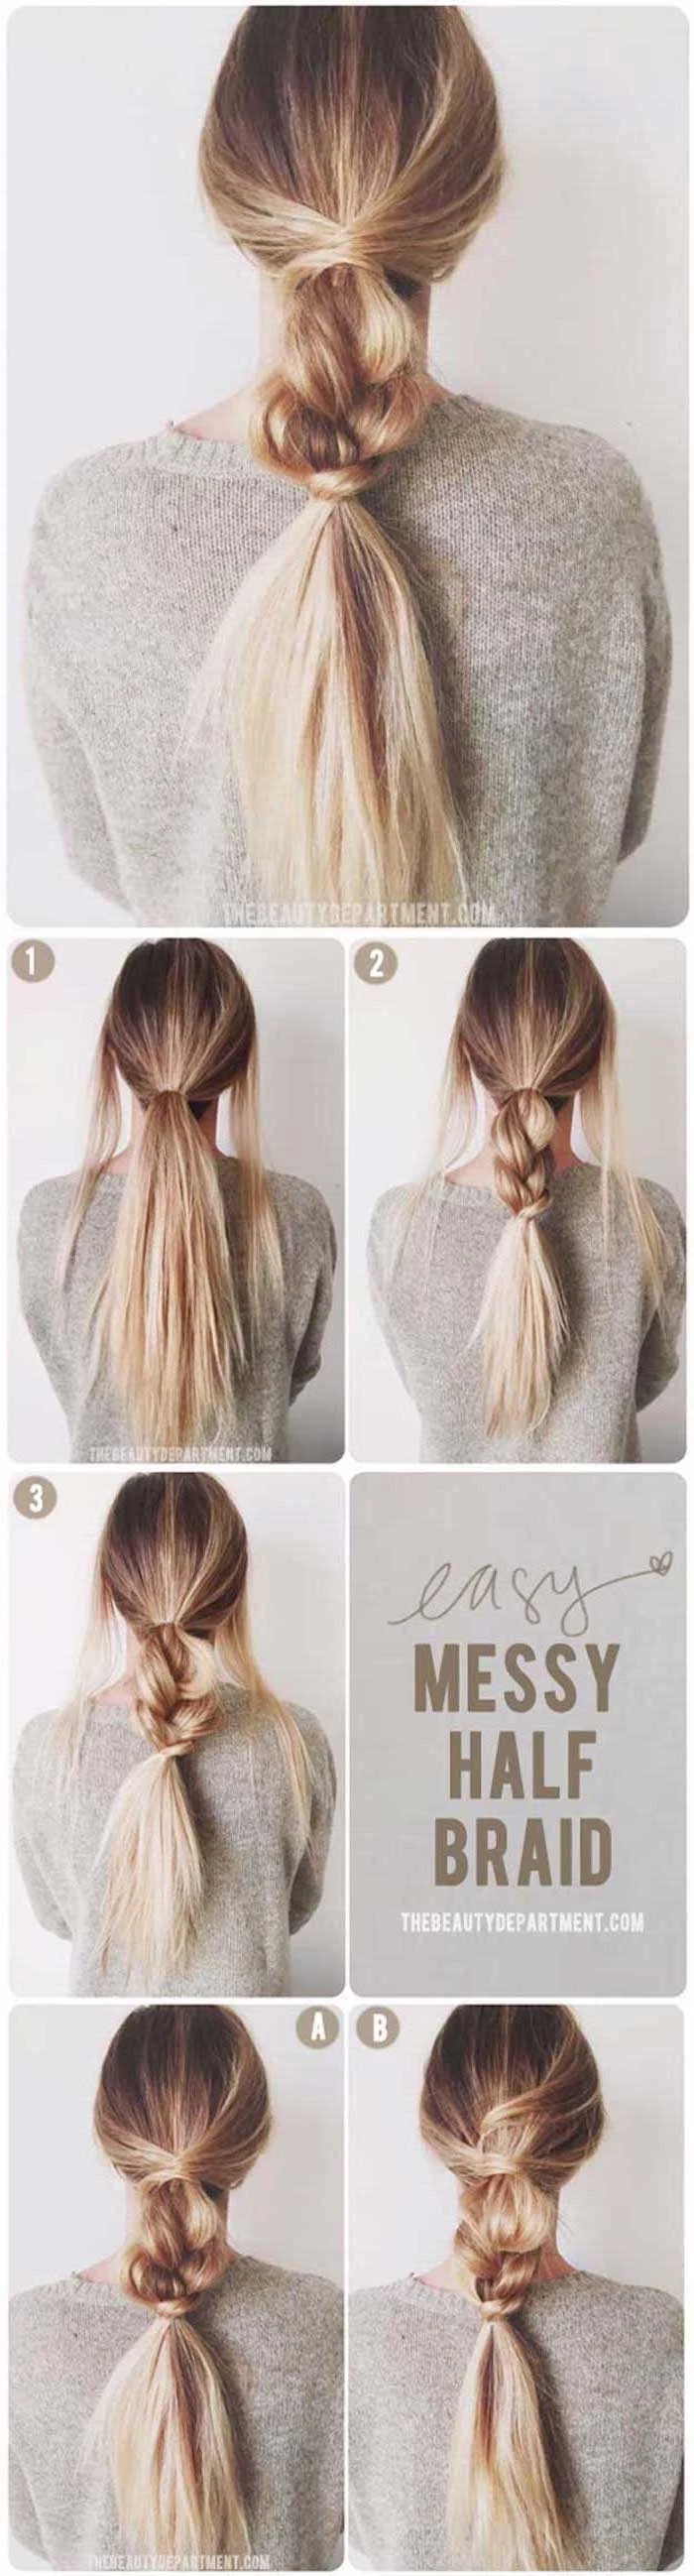 messy half braid photo collage of step by step diy tutorial cool hairstyles for girls done on brunette woman with blonde balayage